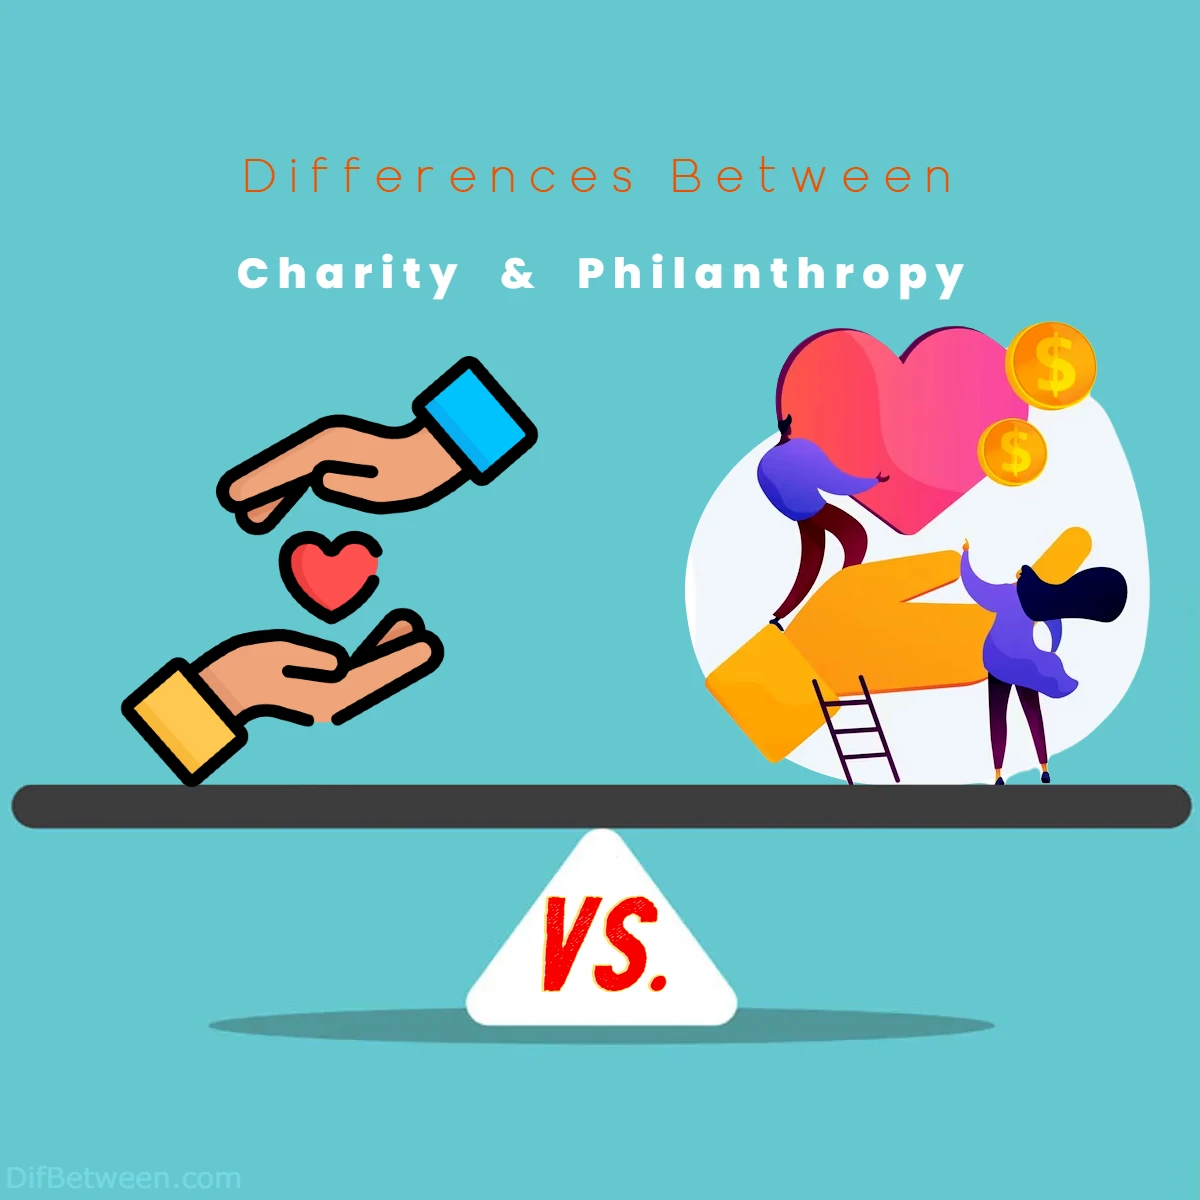 Differences Between Charity vs Philanthropy